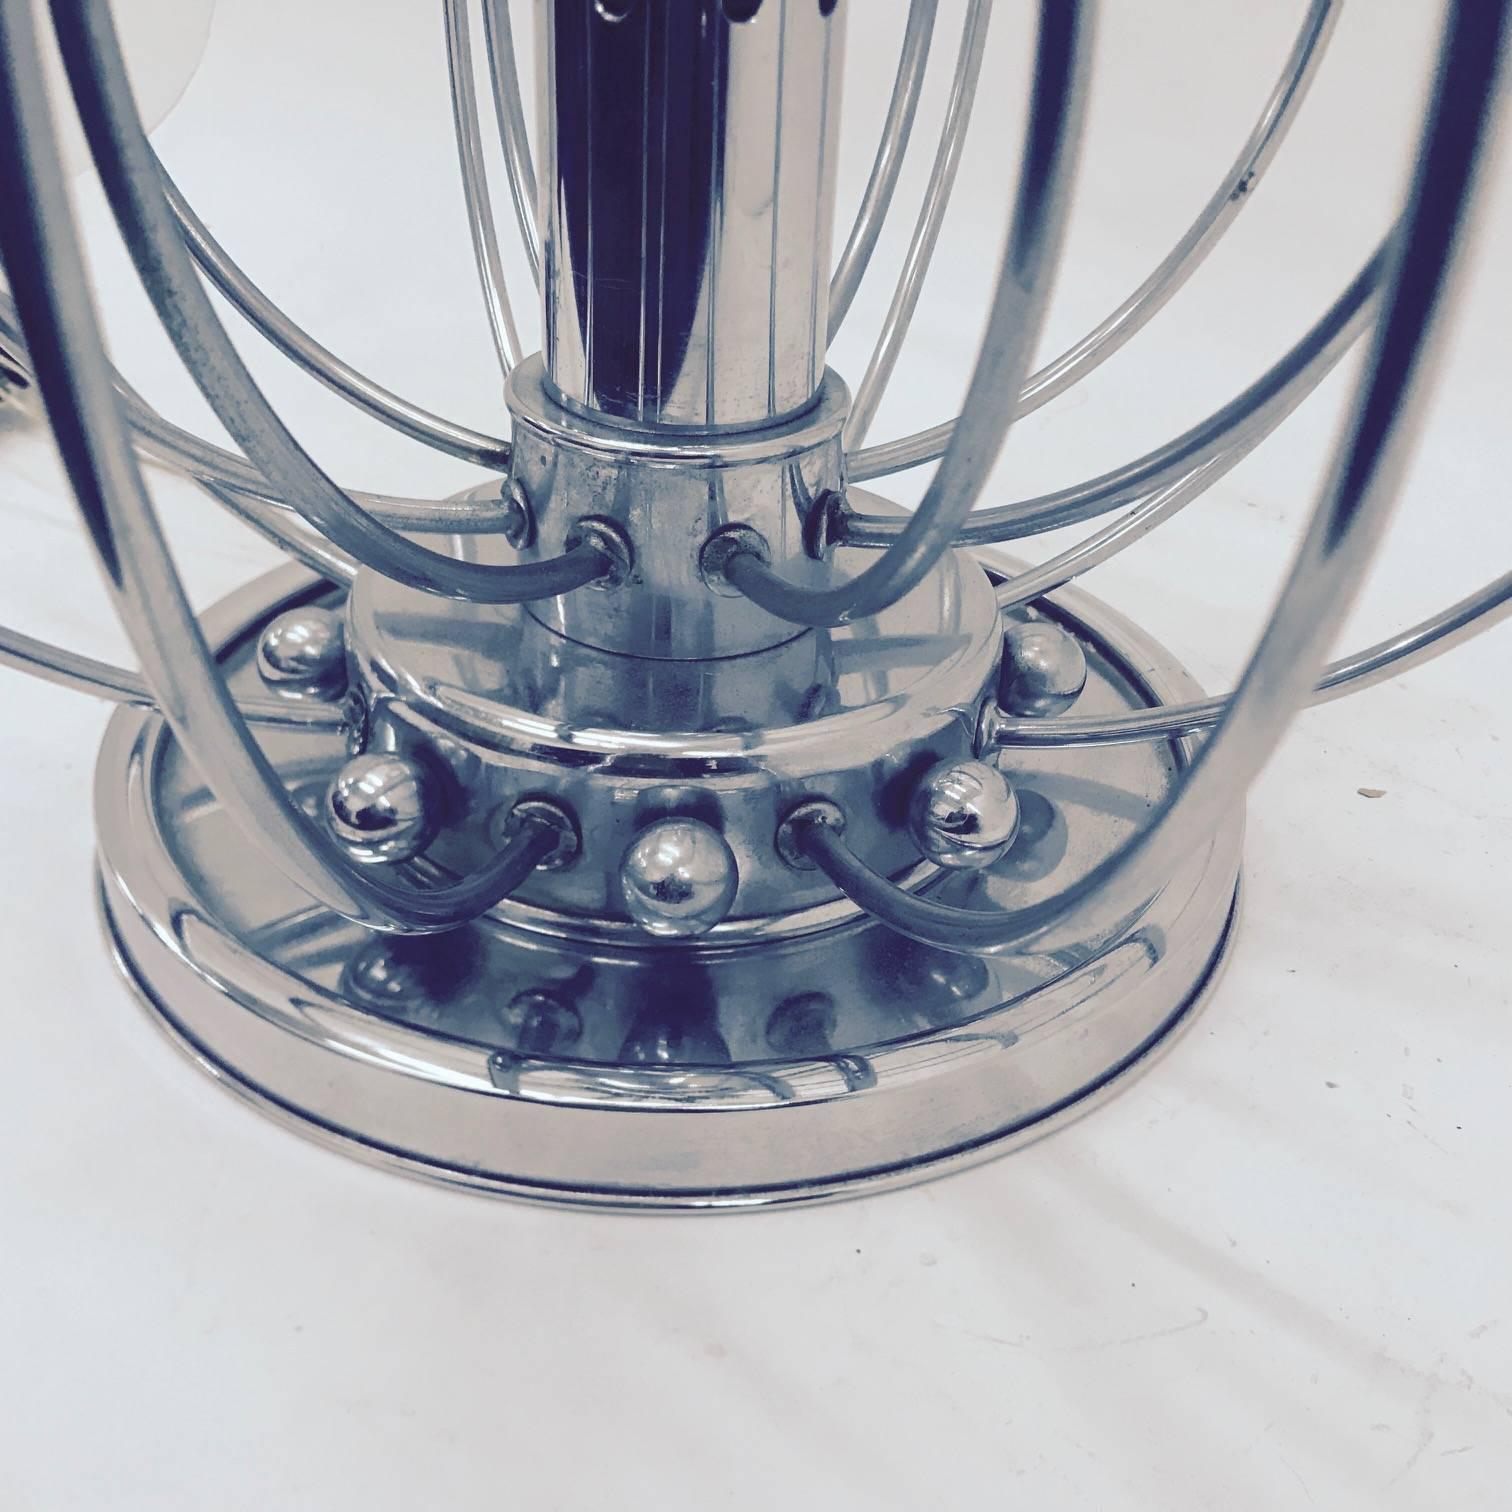 Mid-20th Century 1970s Rare Space Age Chromed Italian Table Lamp in the style of Pistillo Lamp For Sale